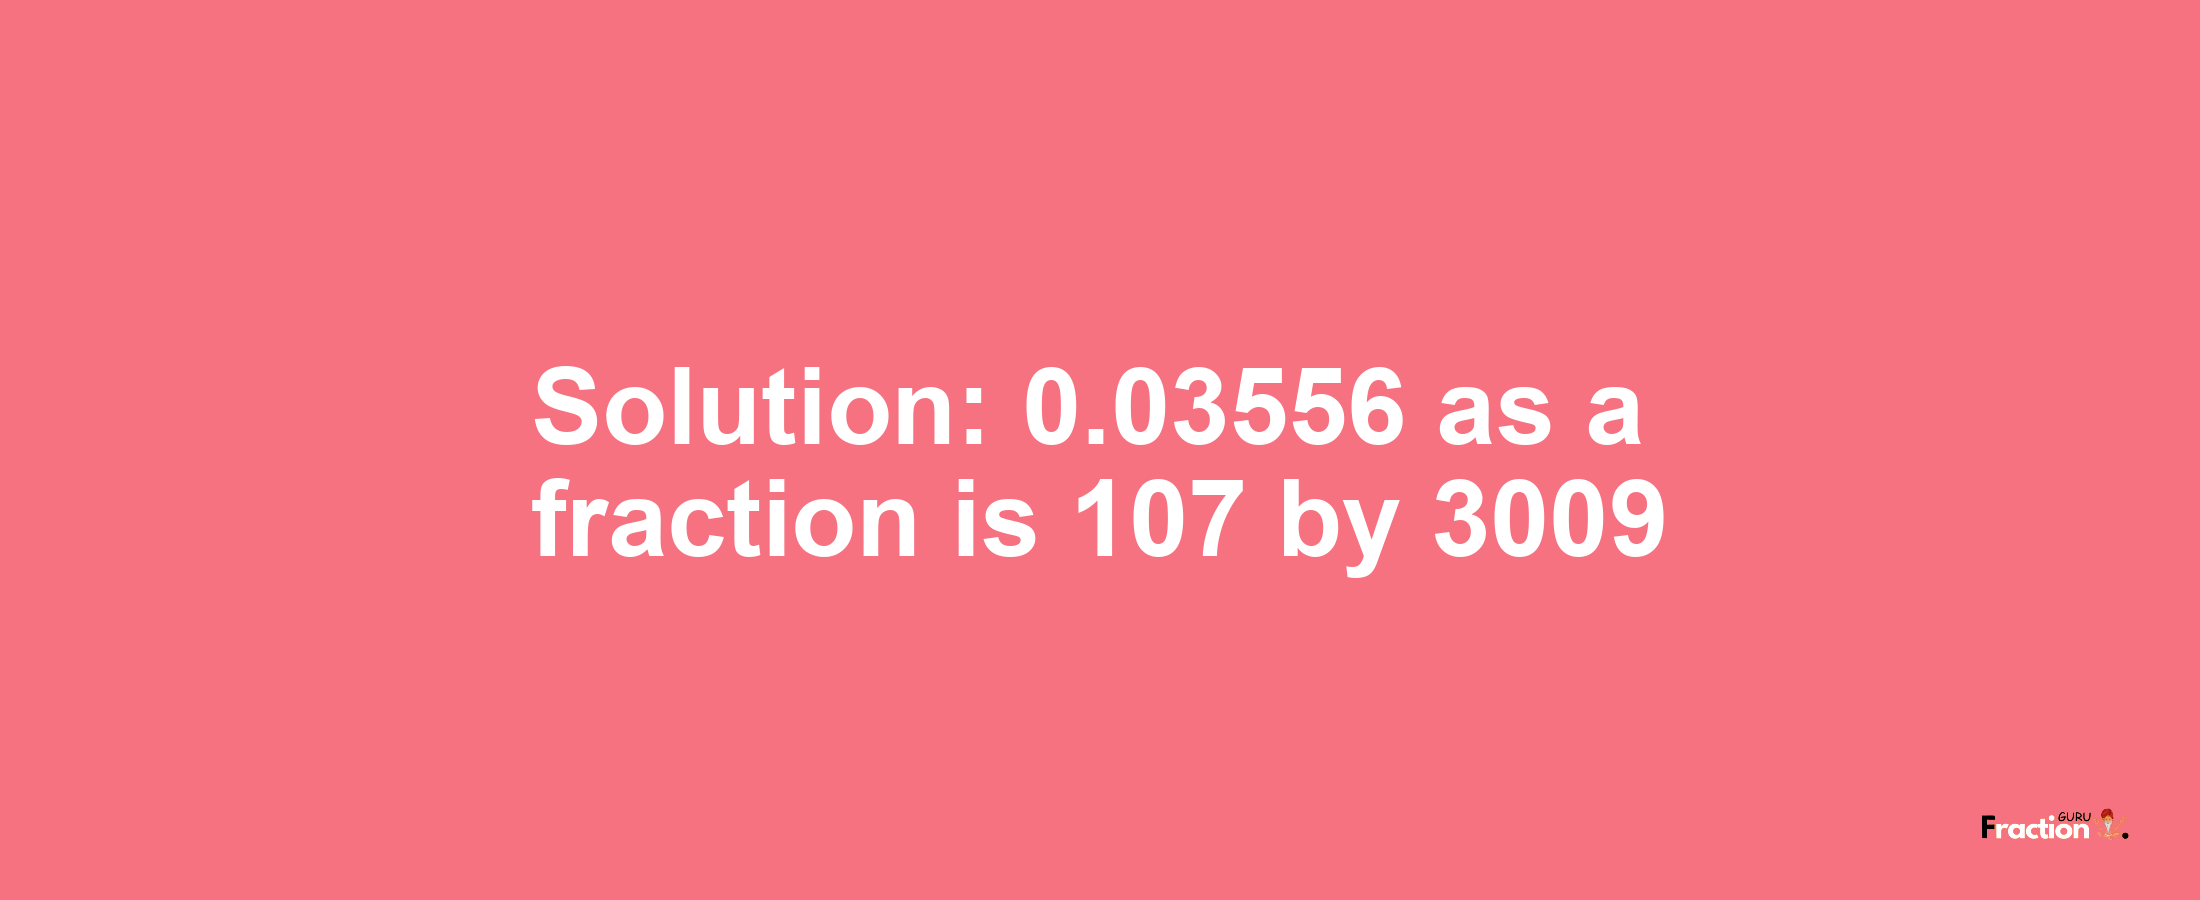 Solution:0.03556 as a fraction is 107/3009